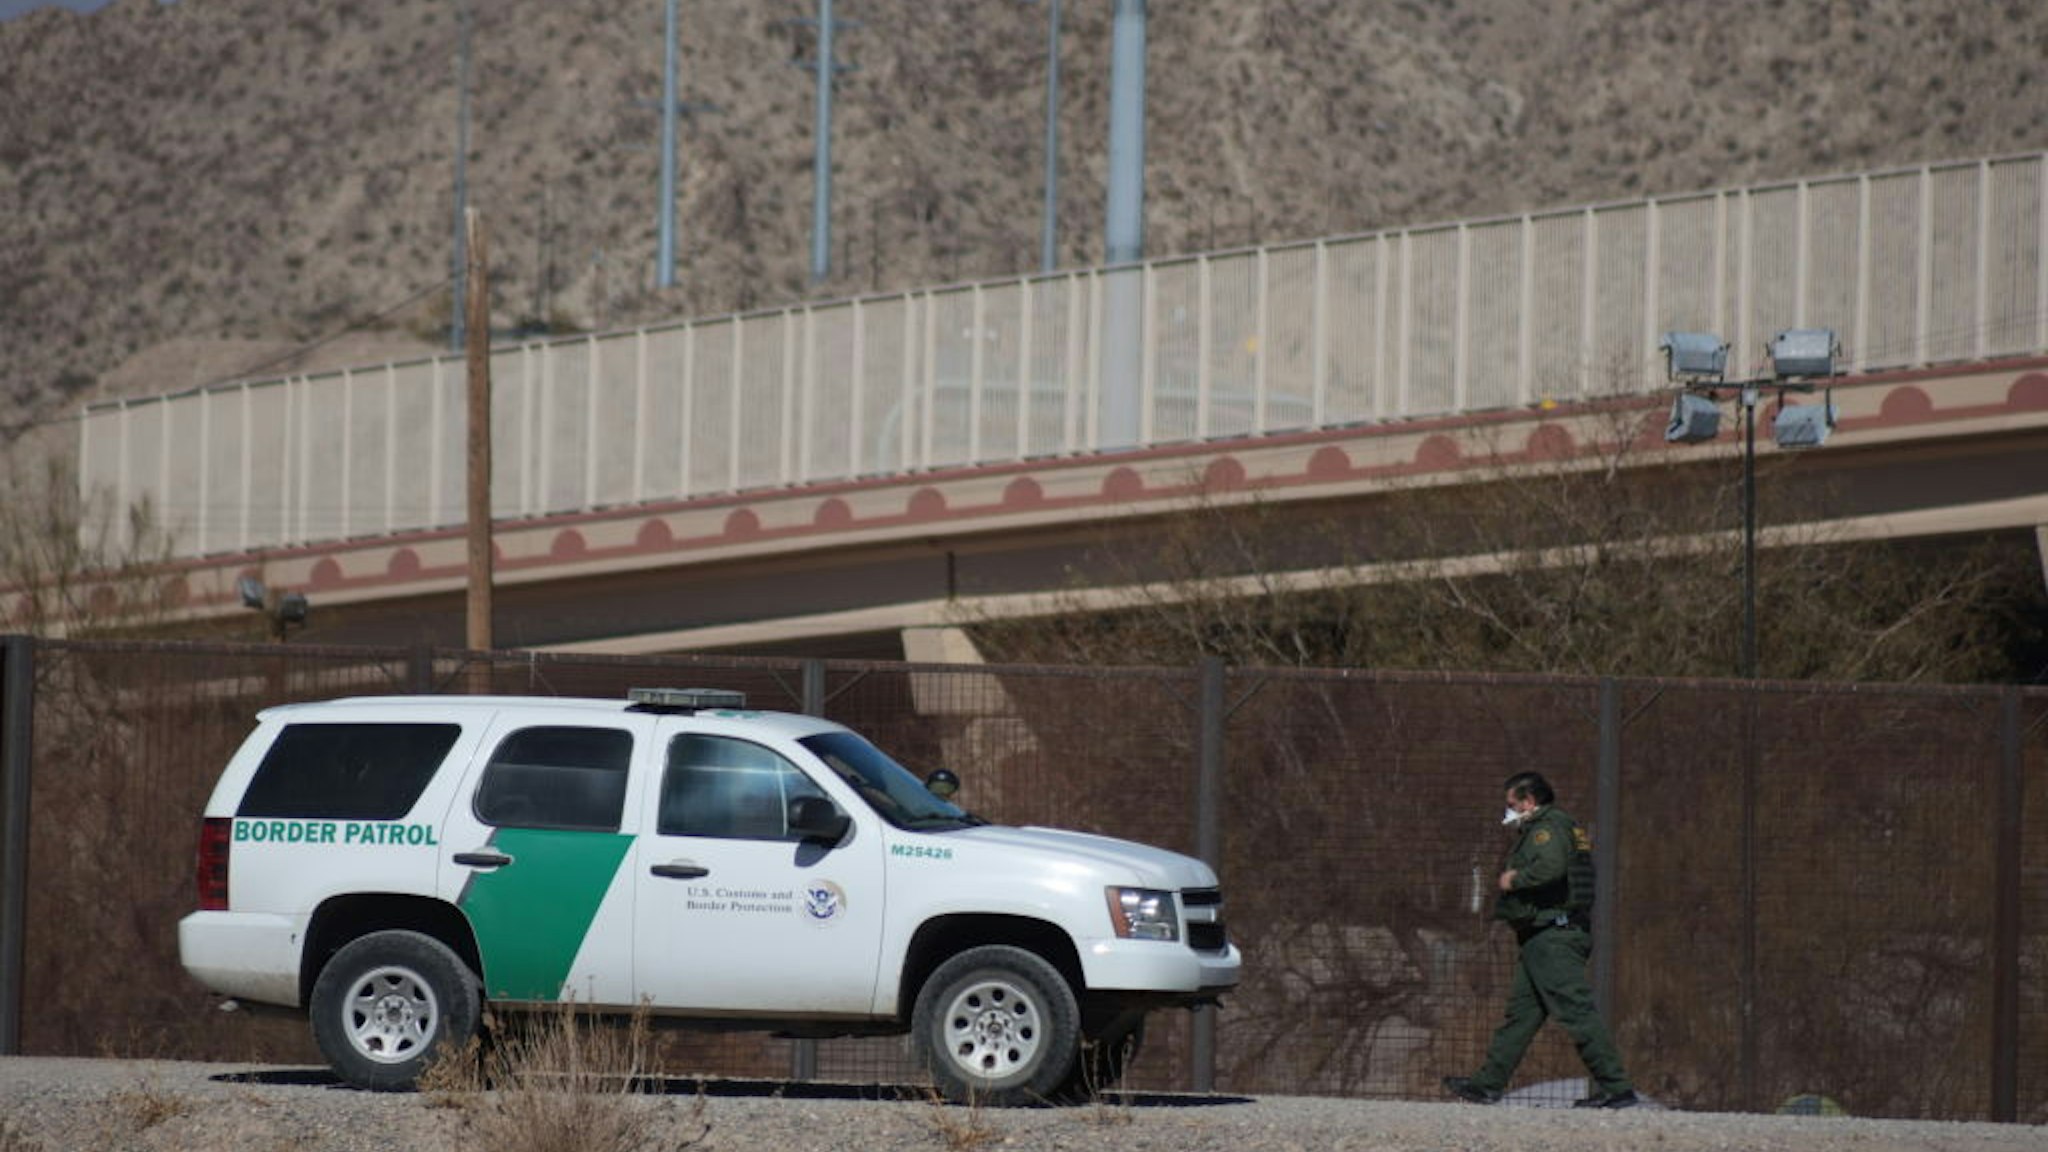 Three migrants tried to trick the border patrol to cross the border and reach the United States, but were detained by the agents in Juarez Chihuahua, Mexico, on 22 January 2021. (Photo by David Peinado/NurPhoto via Getty Images)